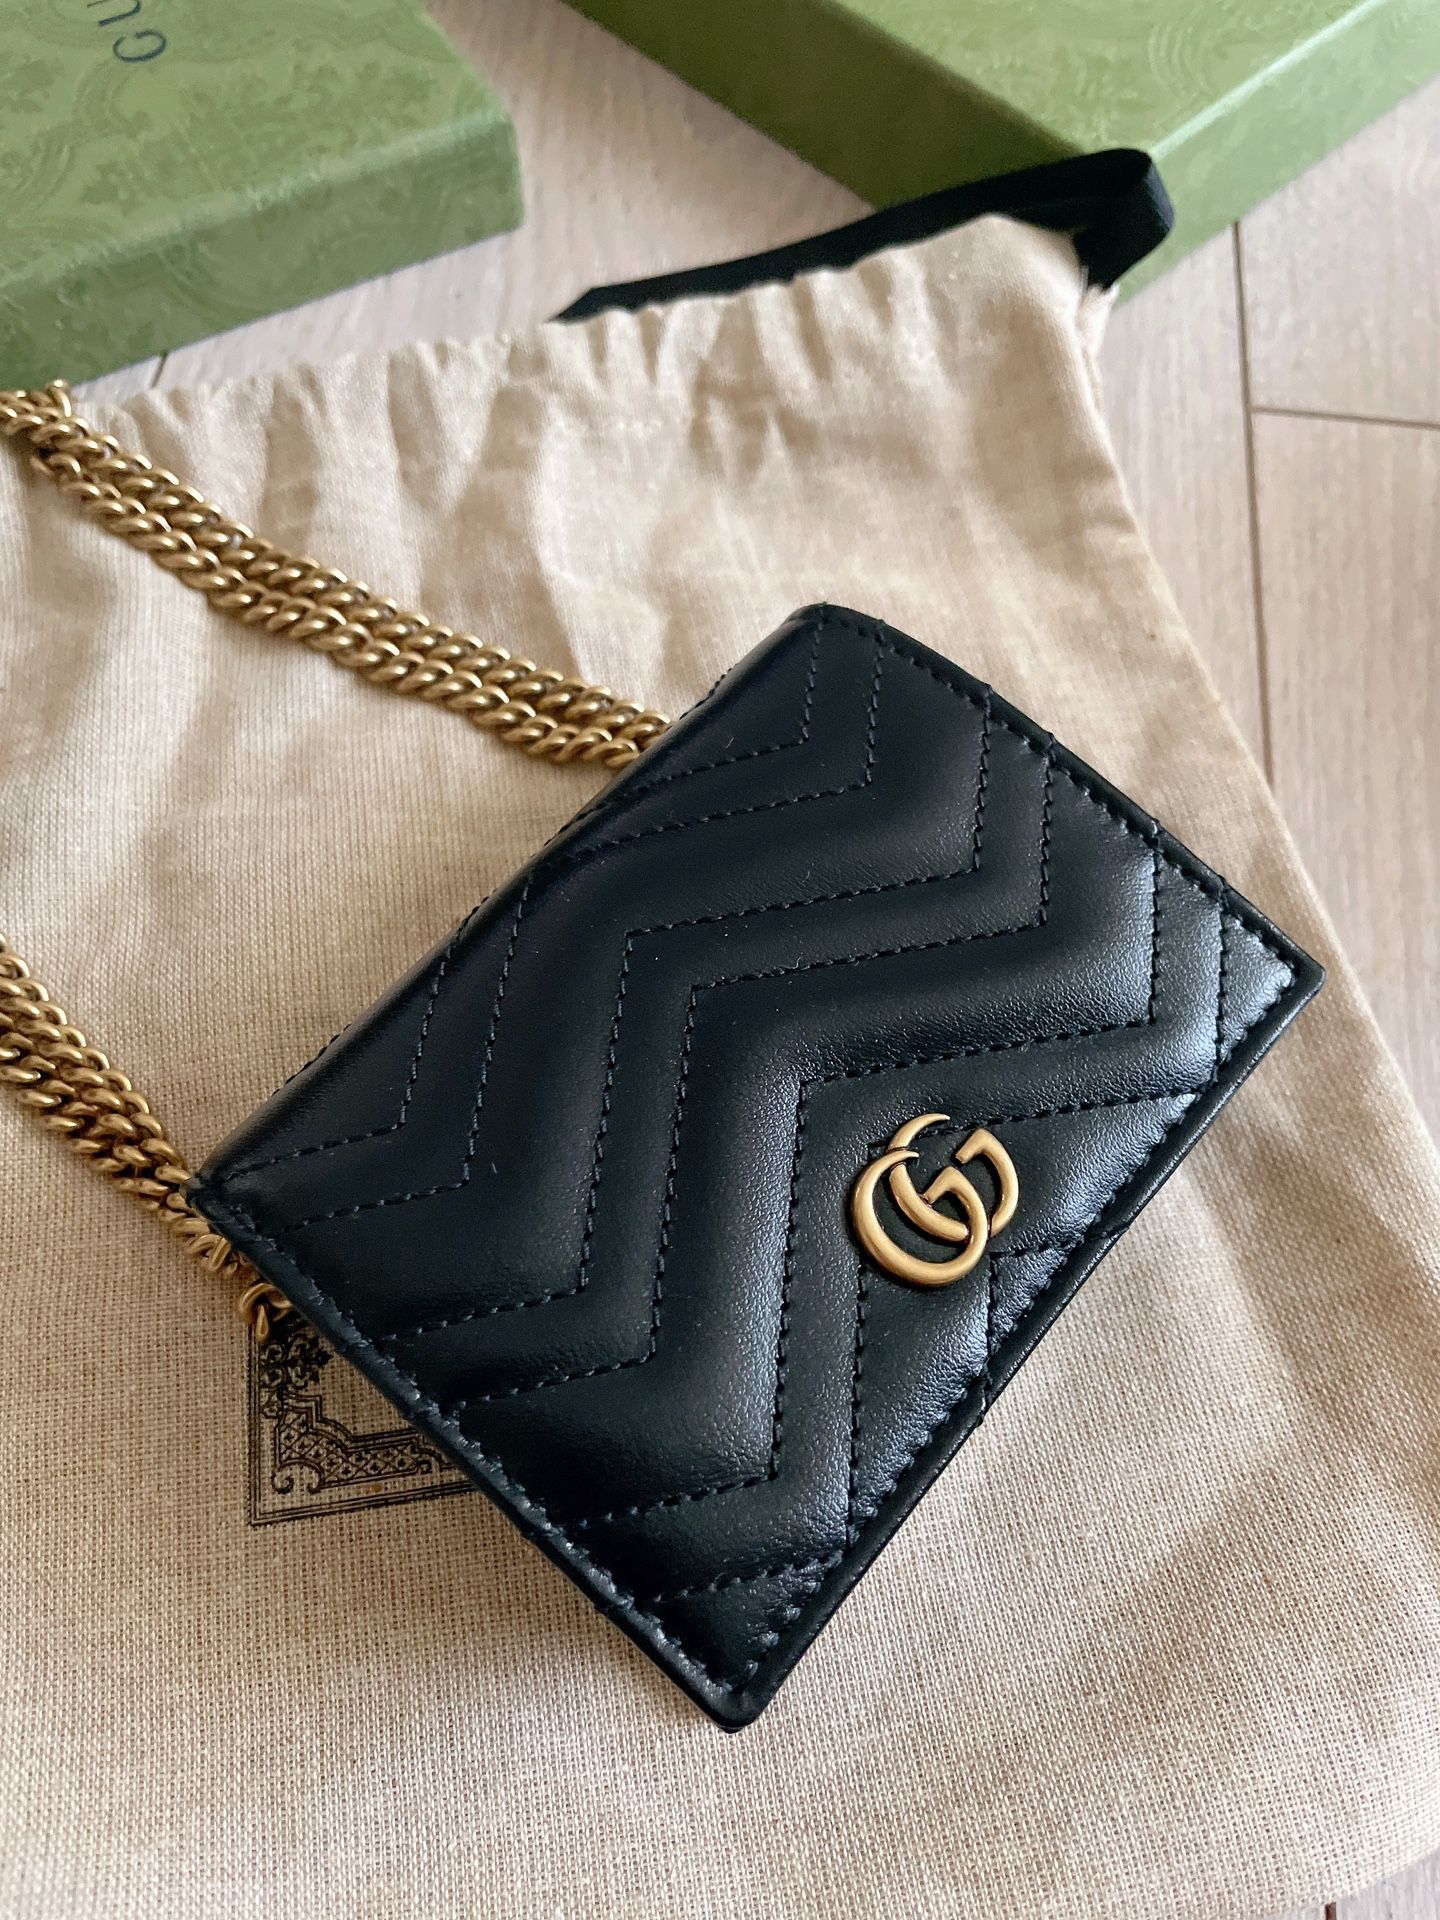 New- Gucci Marmont Wallet With Chain (Crossbody)